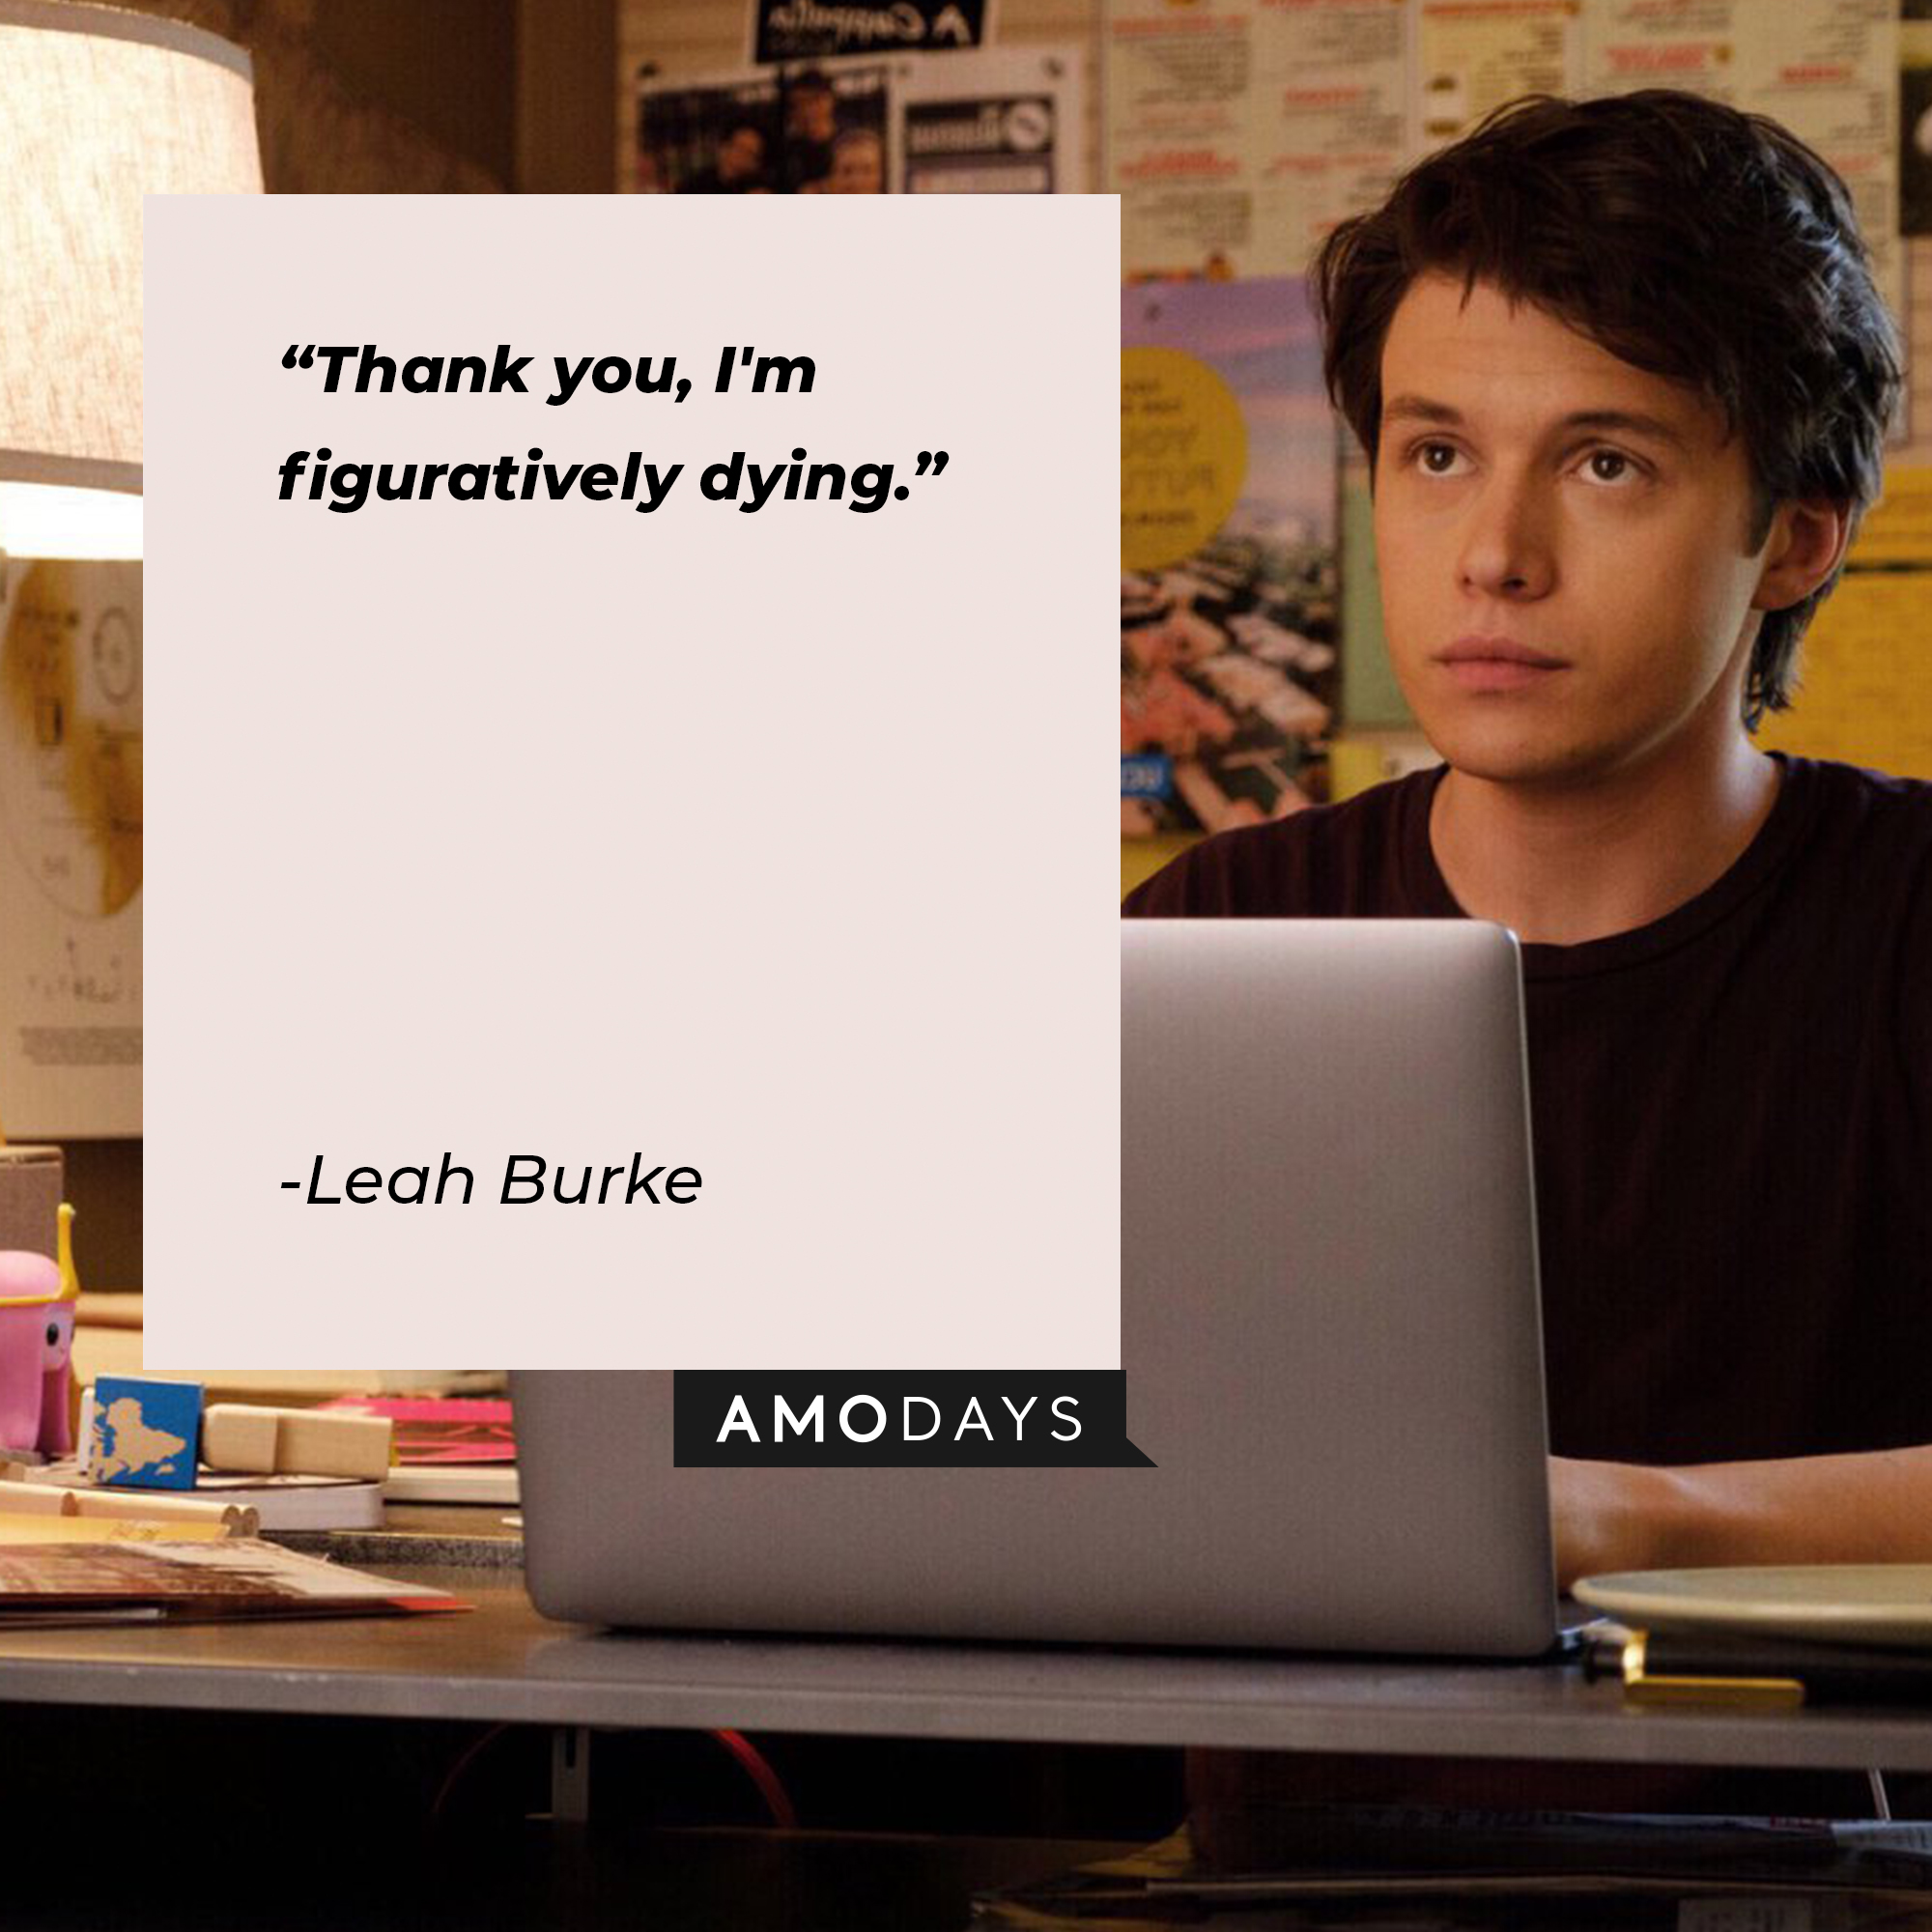 Leah Burke's quote, "Thank you, I'm figuratively dying." | Image: facebook.com/LoveSimonMovie